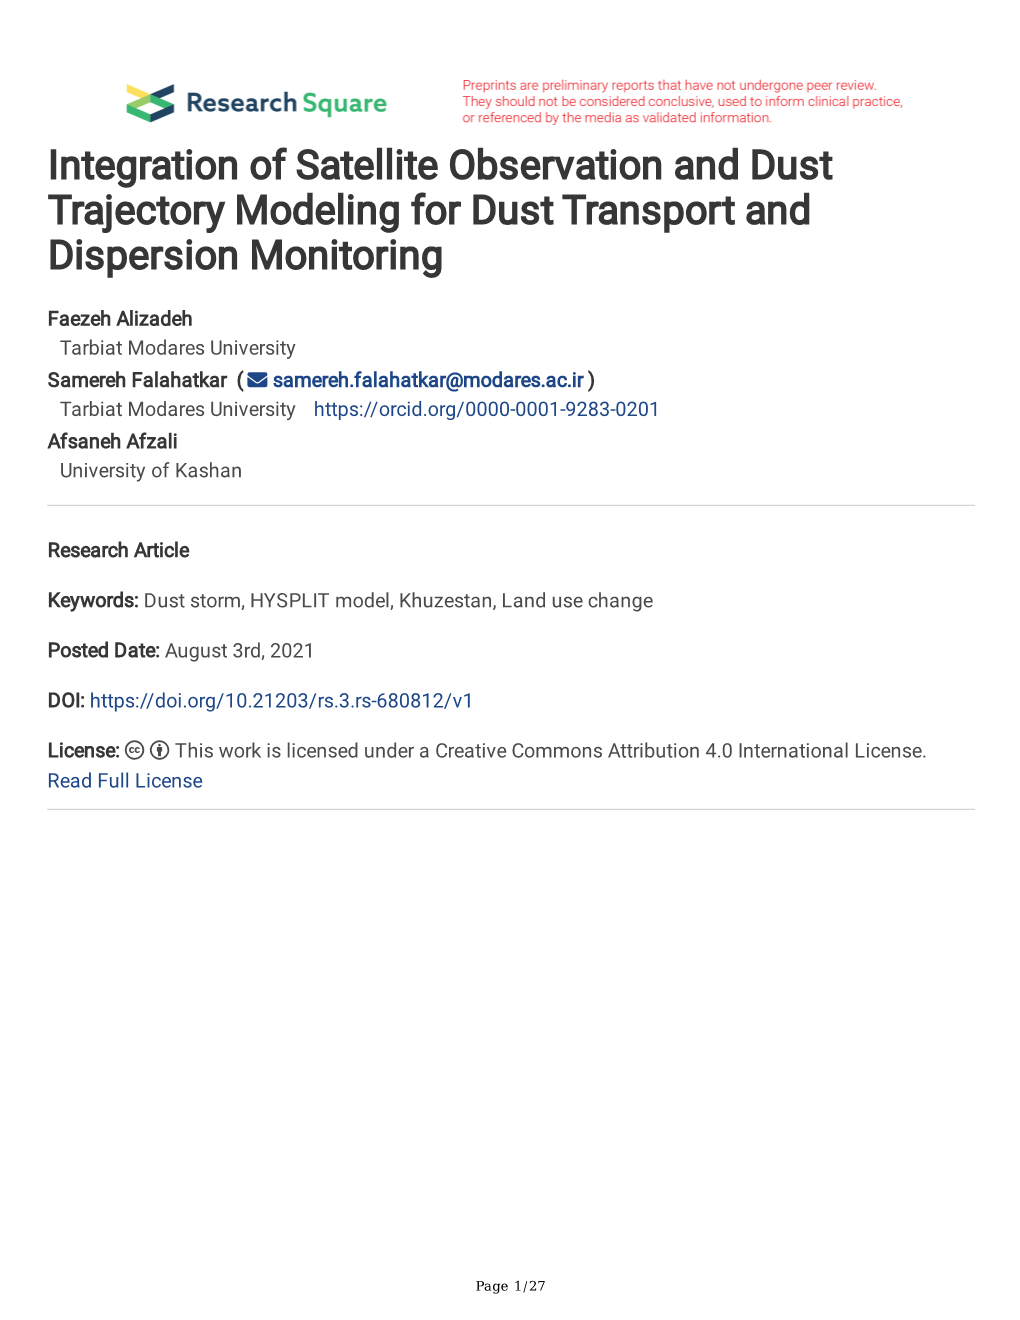 Integration of Satellite Observation and Dust Trajectory Modeling for Dust Transport and Dispersion Monitoring